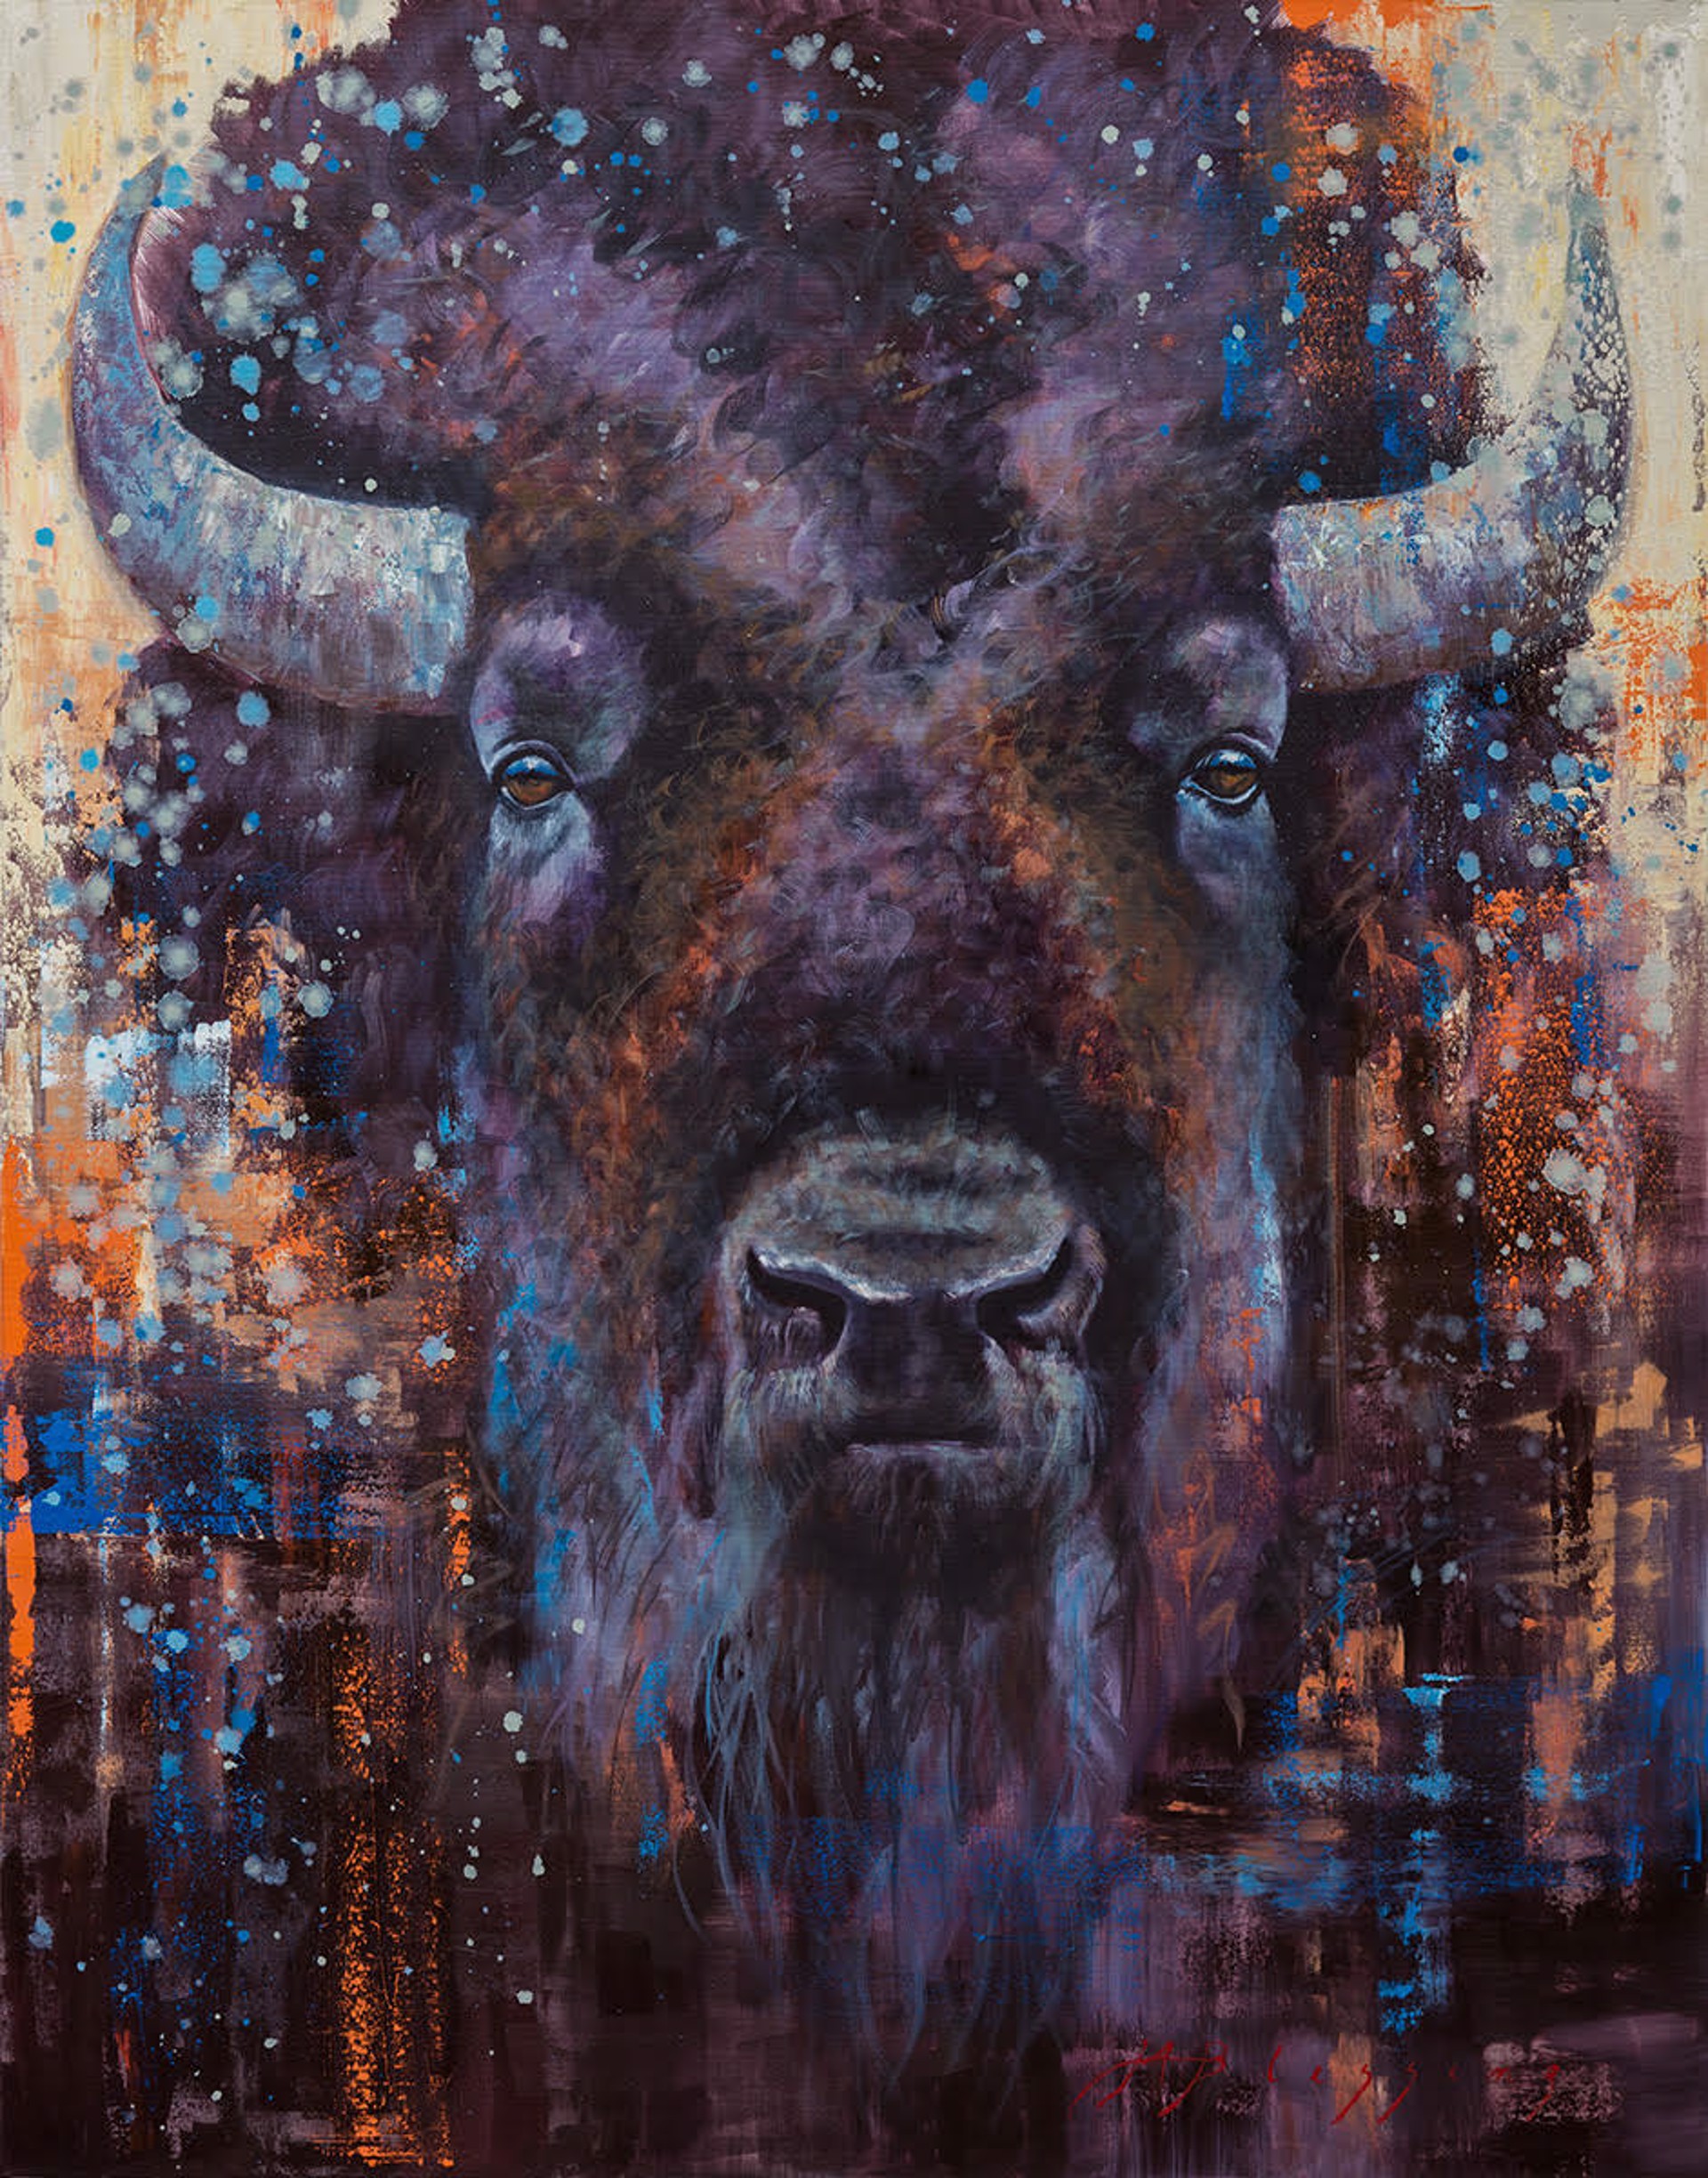 An Original Contemporary Oil Painting Of Bison Face Looking Straight On  With Colorful Abstract Background Markings, By Meagan Blessing